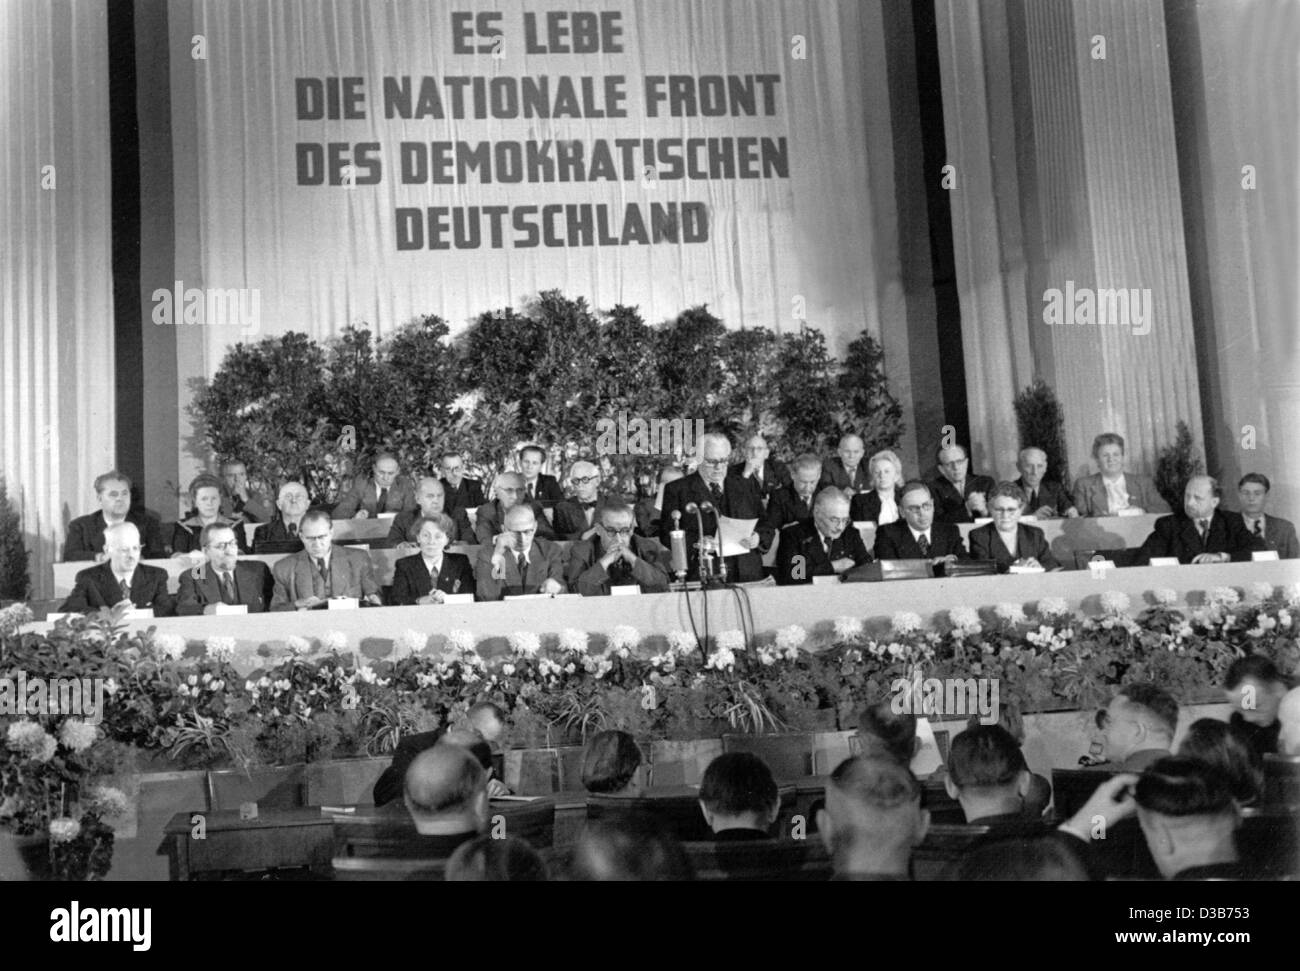 (dpa files) - Wilhelm Pieck reads out the manifesto, which proclaims that all parties and mass organisations have agreed on the creation of the German Democratic Republic, during a meeting of the German Volksrat (people's council) of the Soviet sector in East Berlin, 7 October 1949. The slogan on th Stock Photo